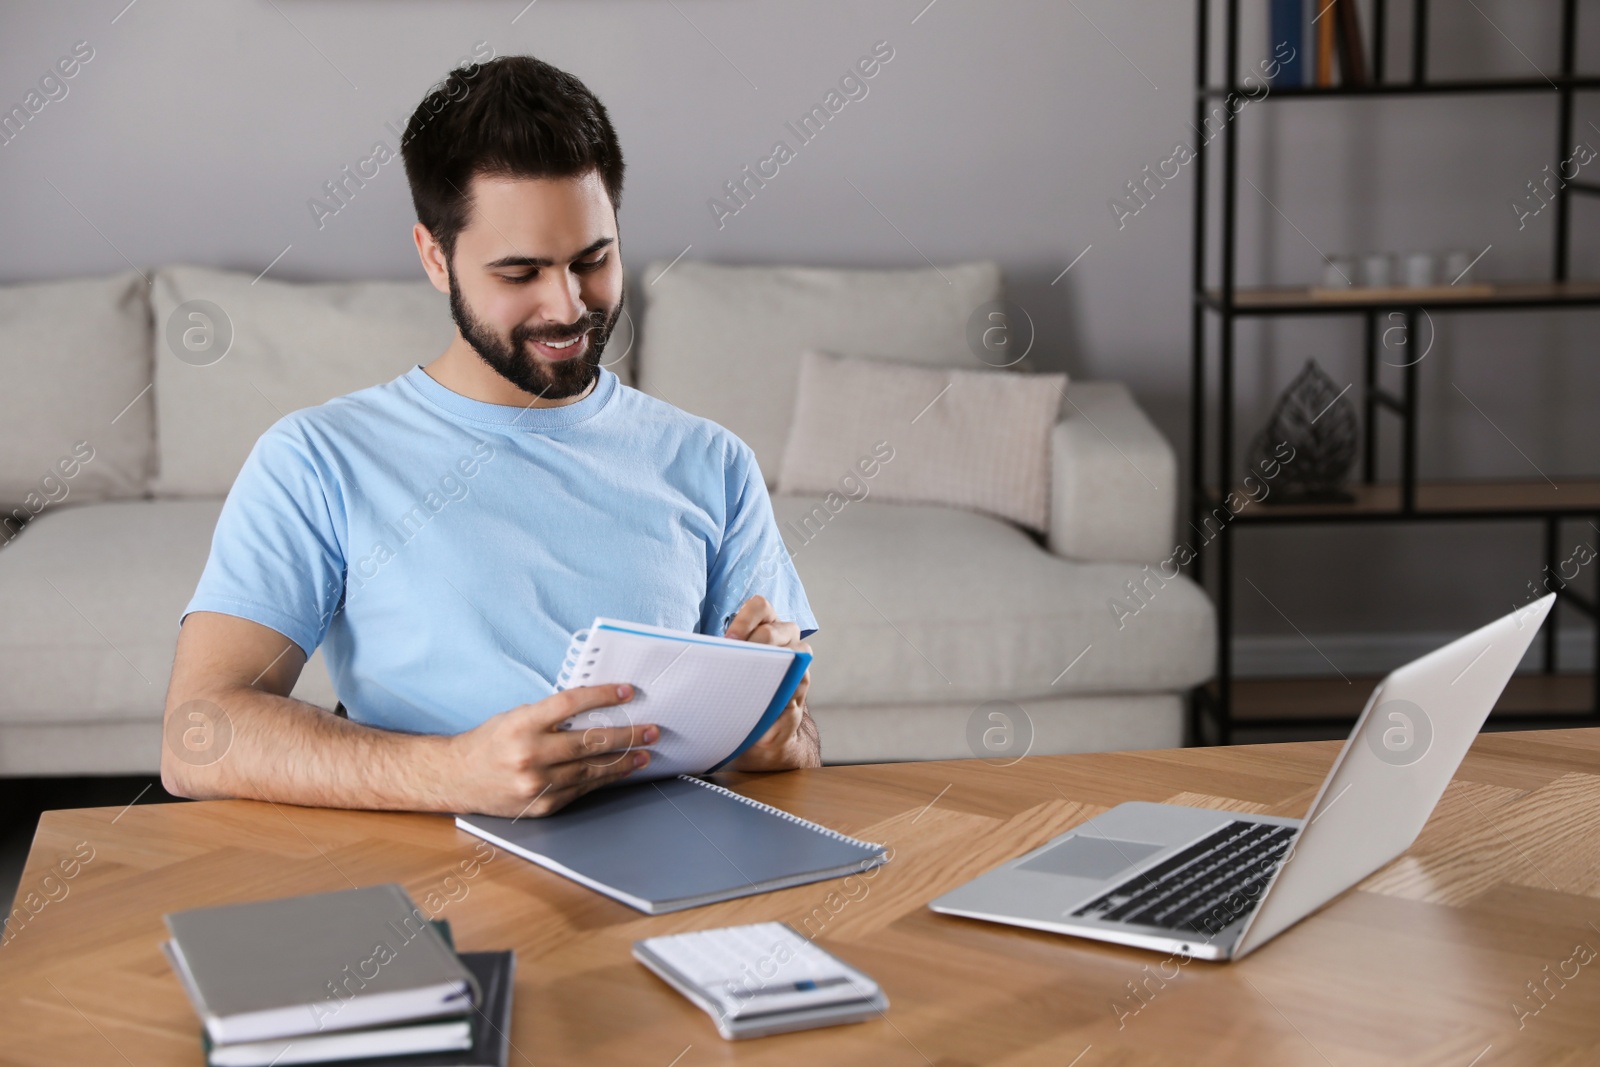 Photo of Young man writing down notes during webinar at table in room